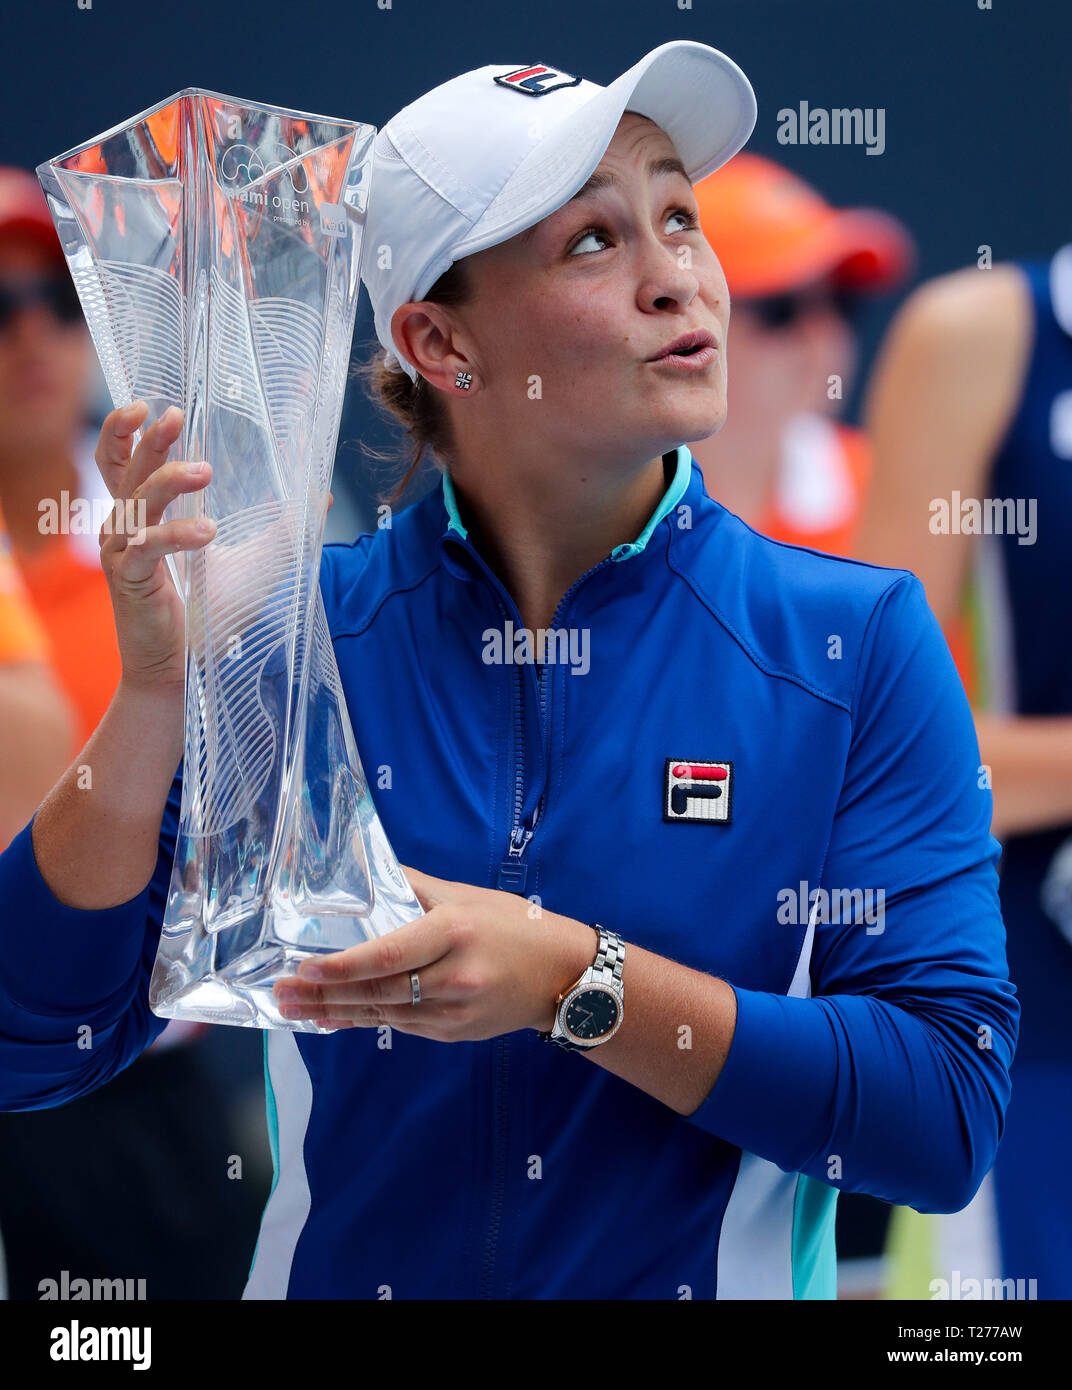 Miami Gardens, Florida, USA. 30th Mar, 2019. Ashleigh Barty, of Australia,  holds the championship trophy during the awards ceremony after winning the  women's final against Karolina Pliskova, of the Czech Republic, of